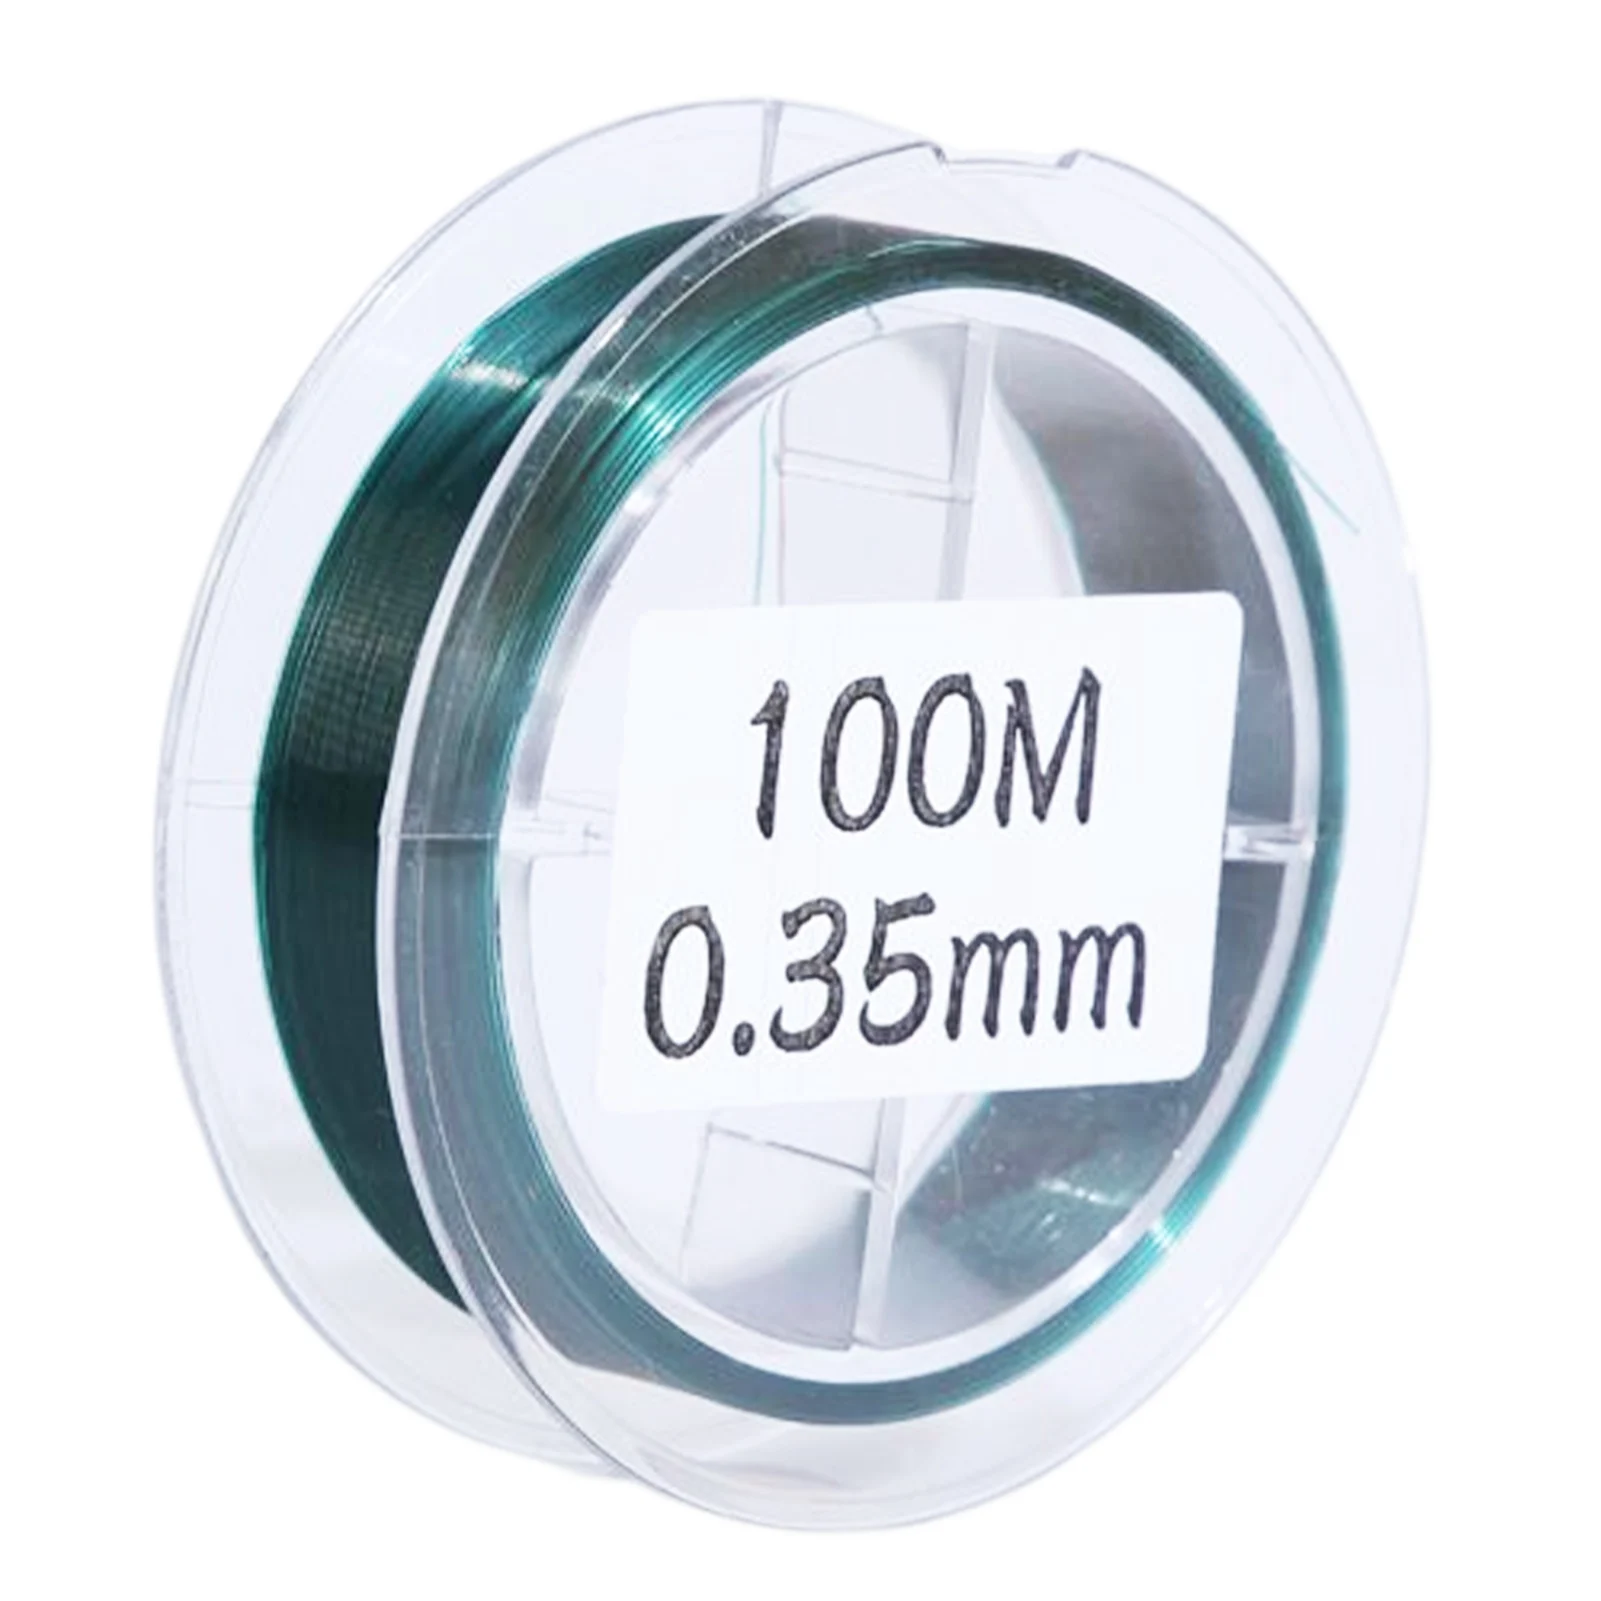 100M Super Strong Tensile Nylon Fishing Line Waterproof and Wear 100M  Fishing Tackle Angling Tool LA